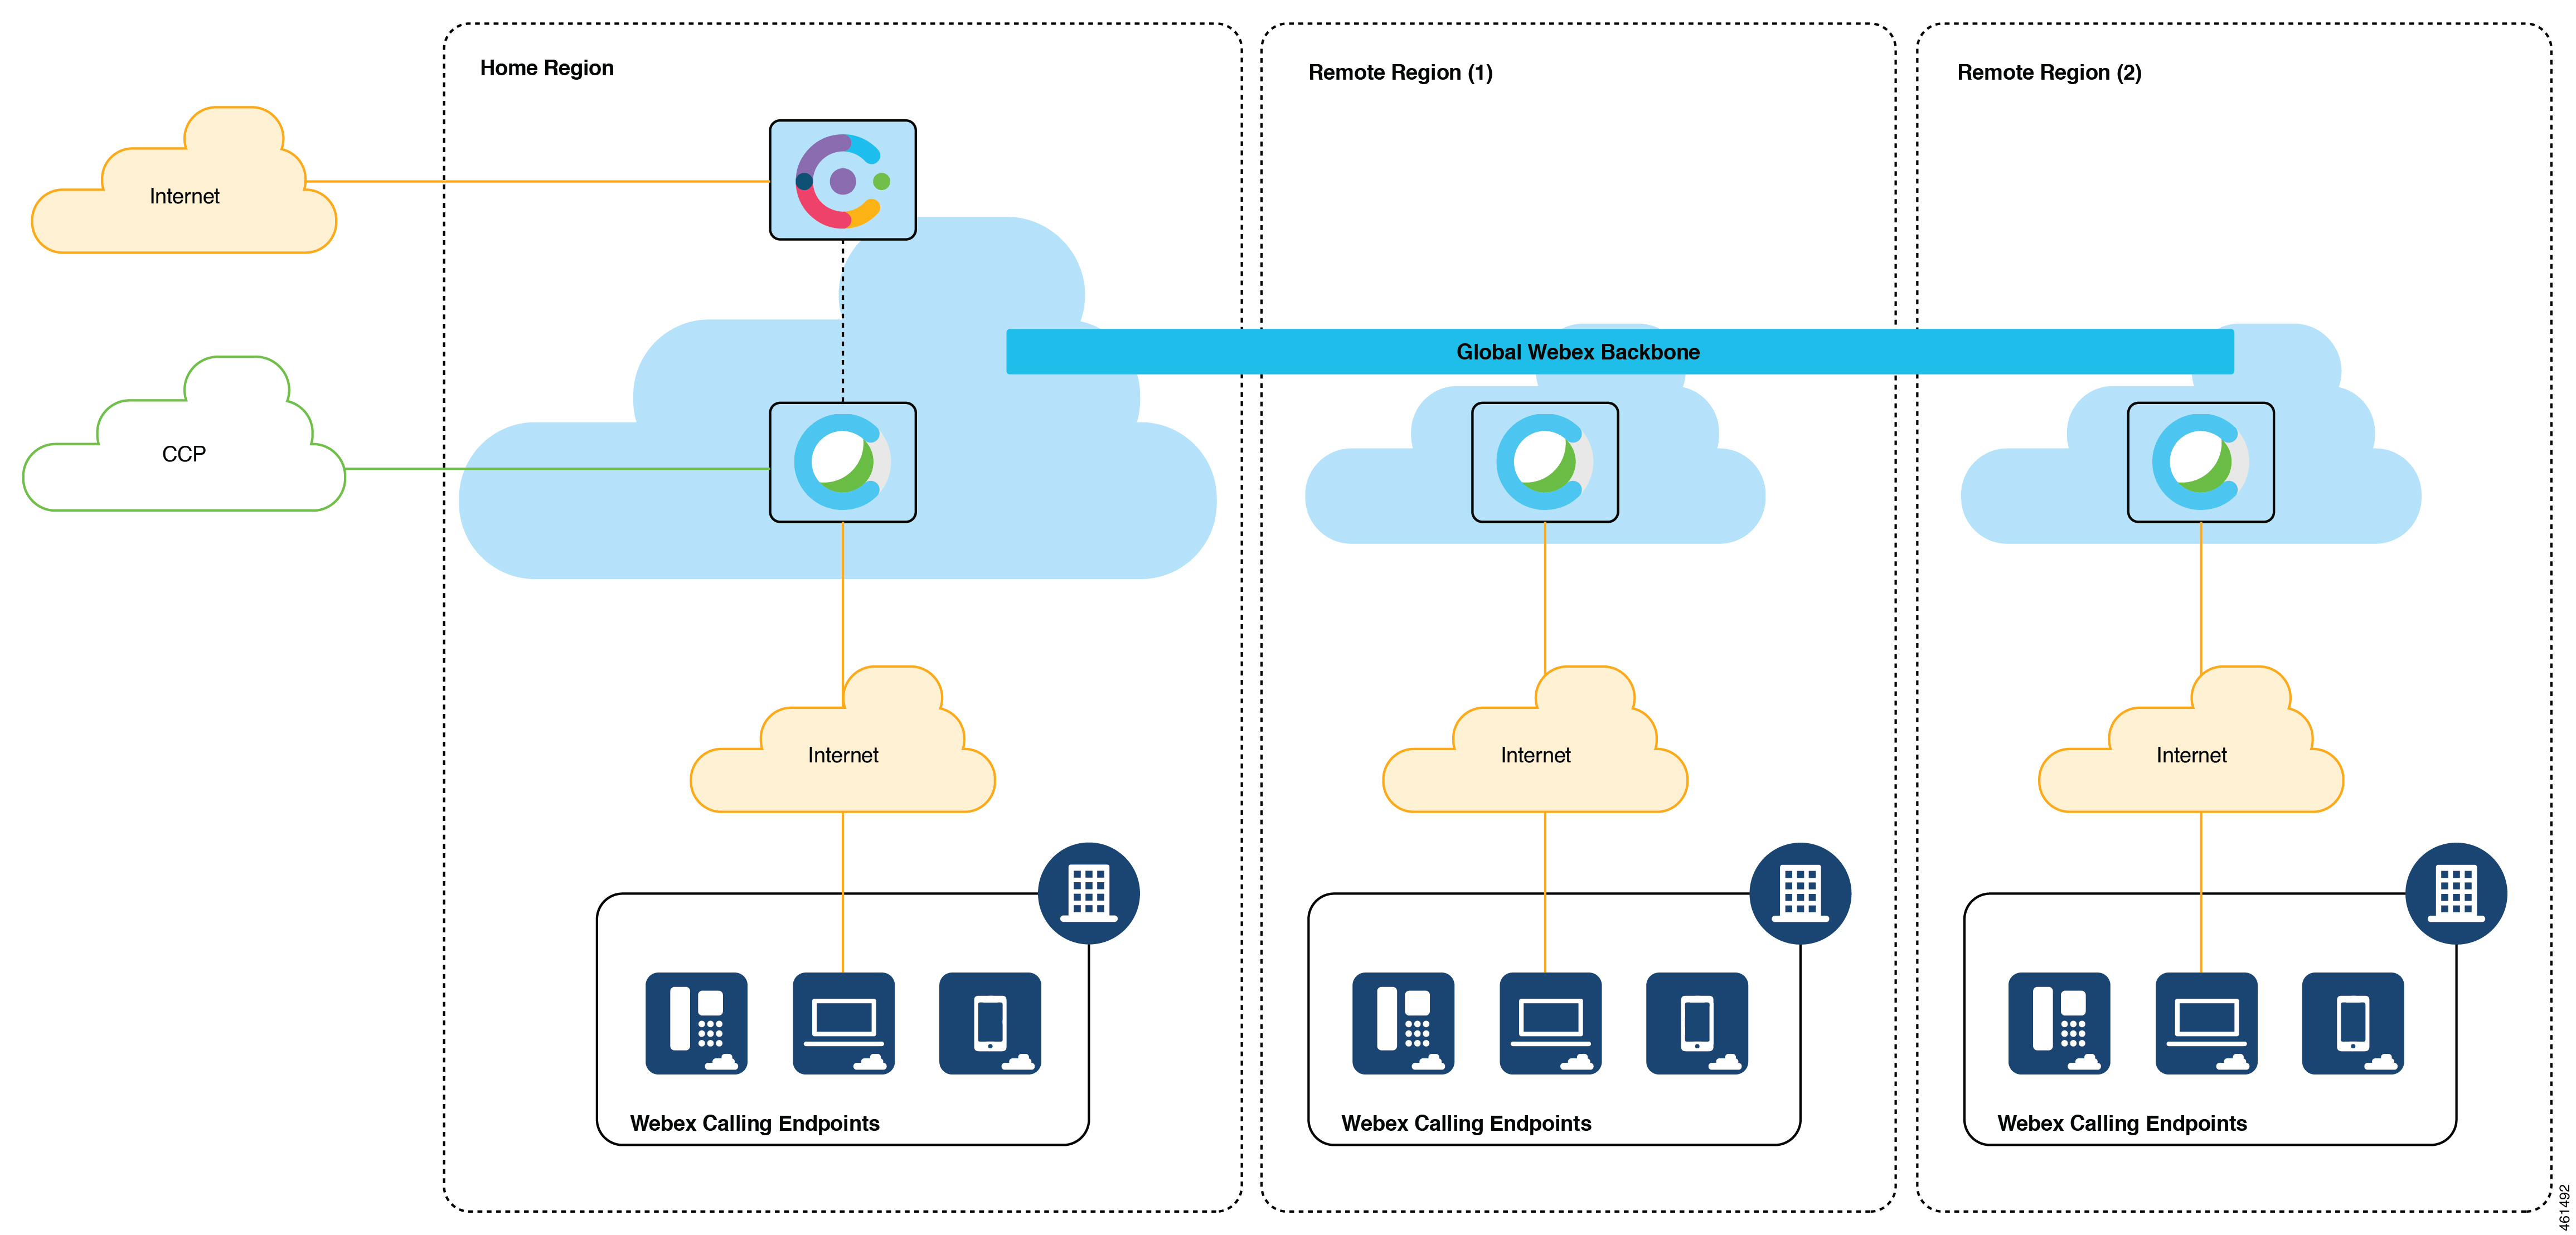 Home data site with two regions connected with the Cisco Webex backbone.